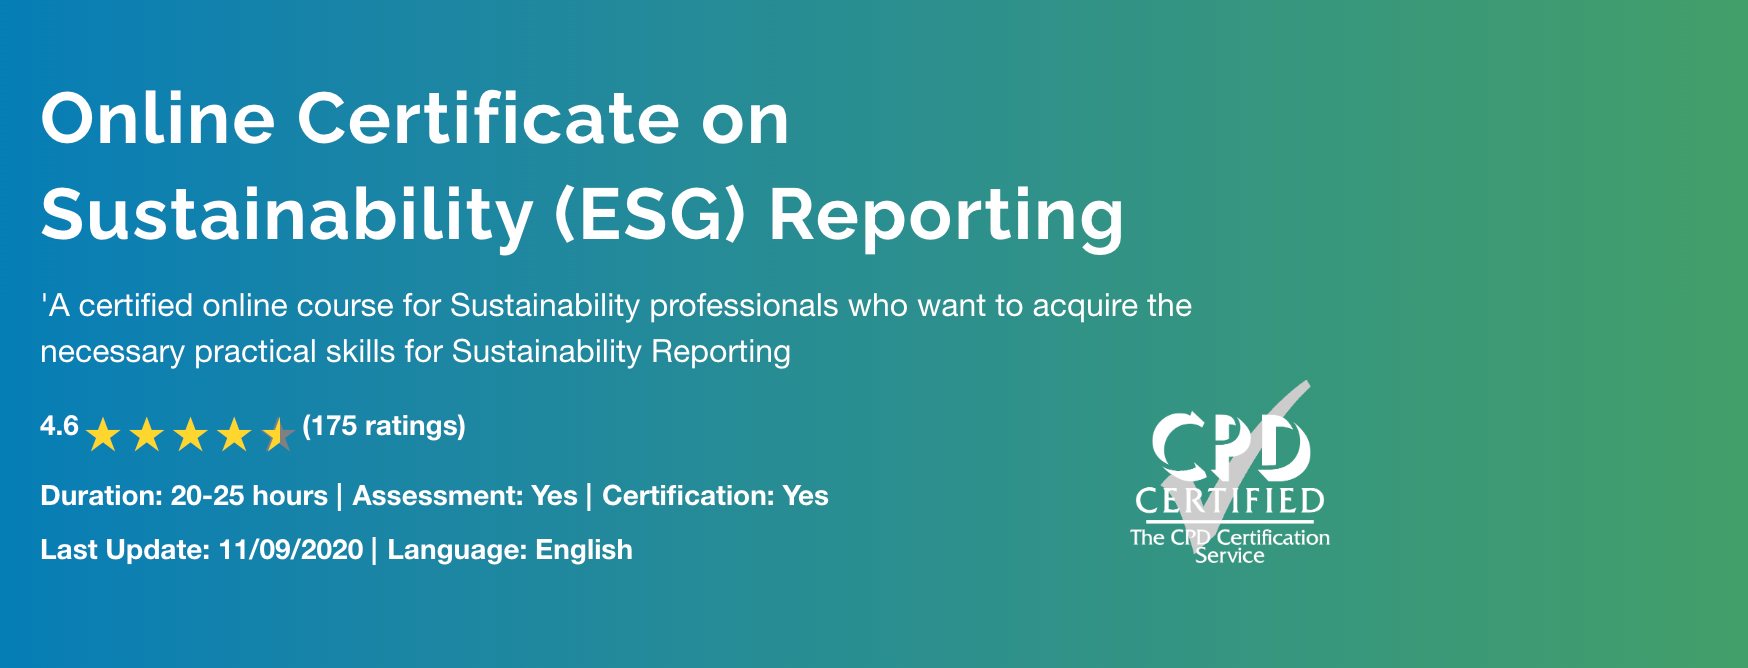 Sustainability Certificate (ESG) Reporting